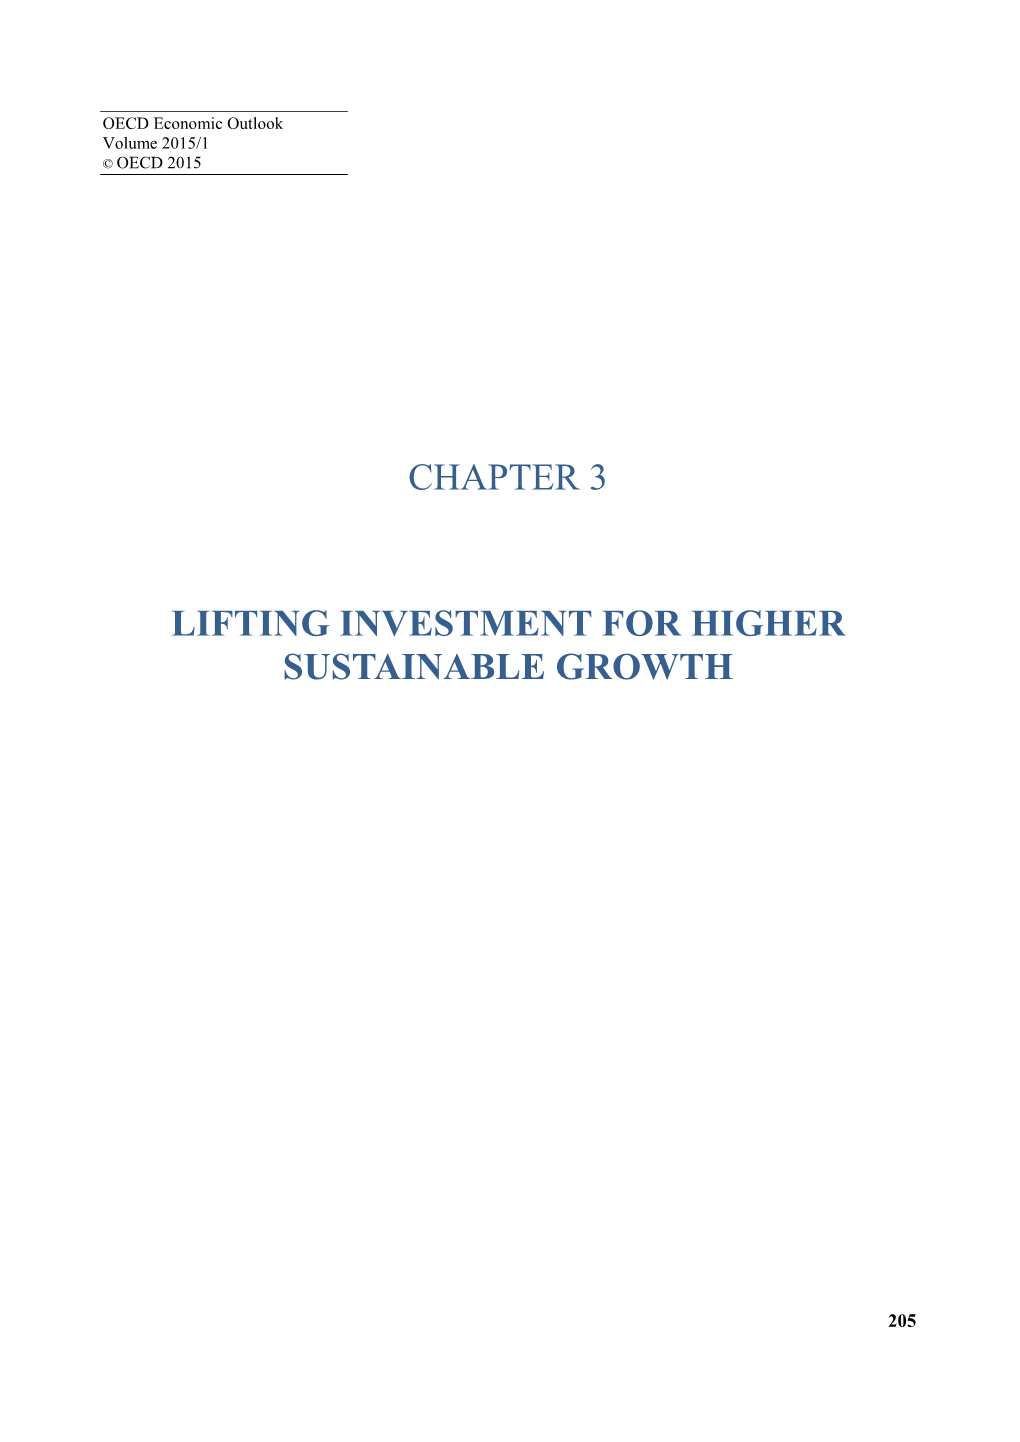 Lifting Investment for Higher Sustainable Growth